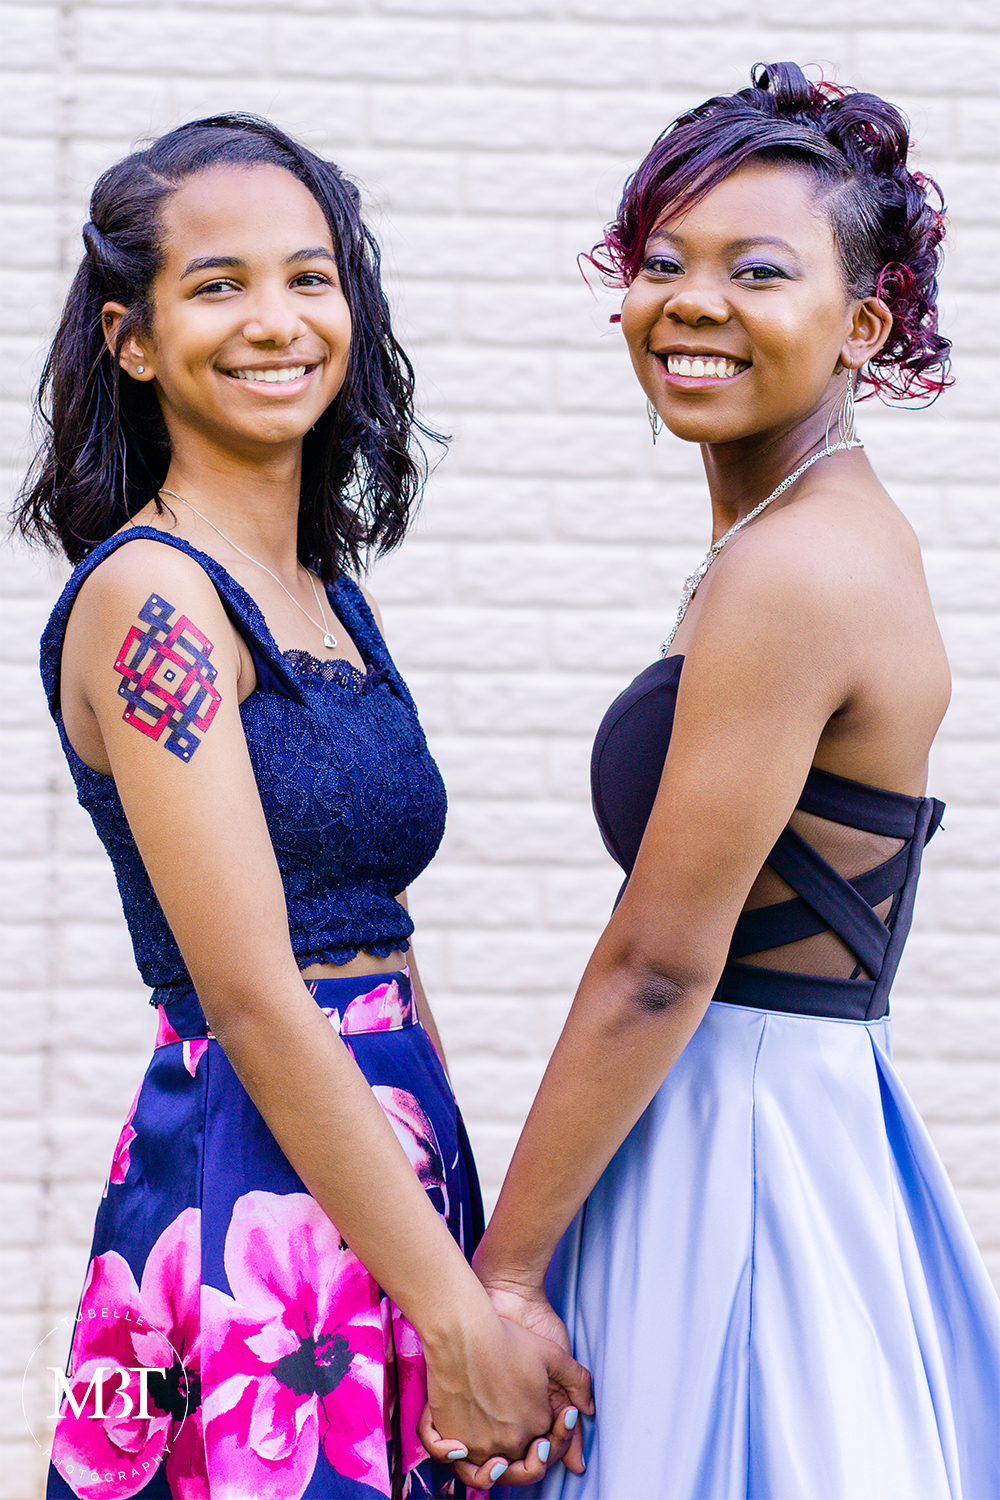 best friends prom session - they are holding each other's hands and smiling, taken at a backyard in Fairfax, Virginia taken by a Northern Virginia portrait photographer